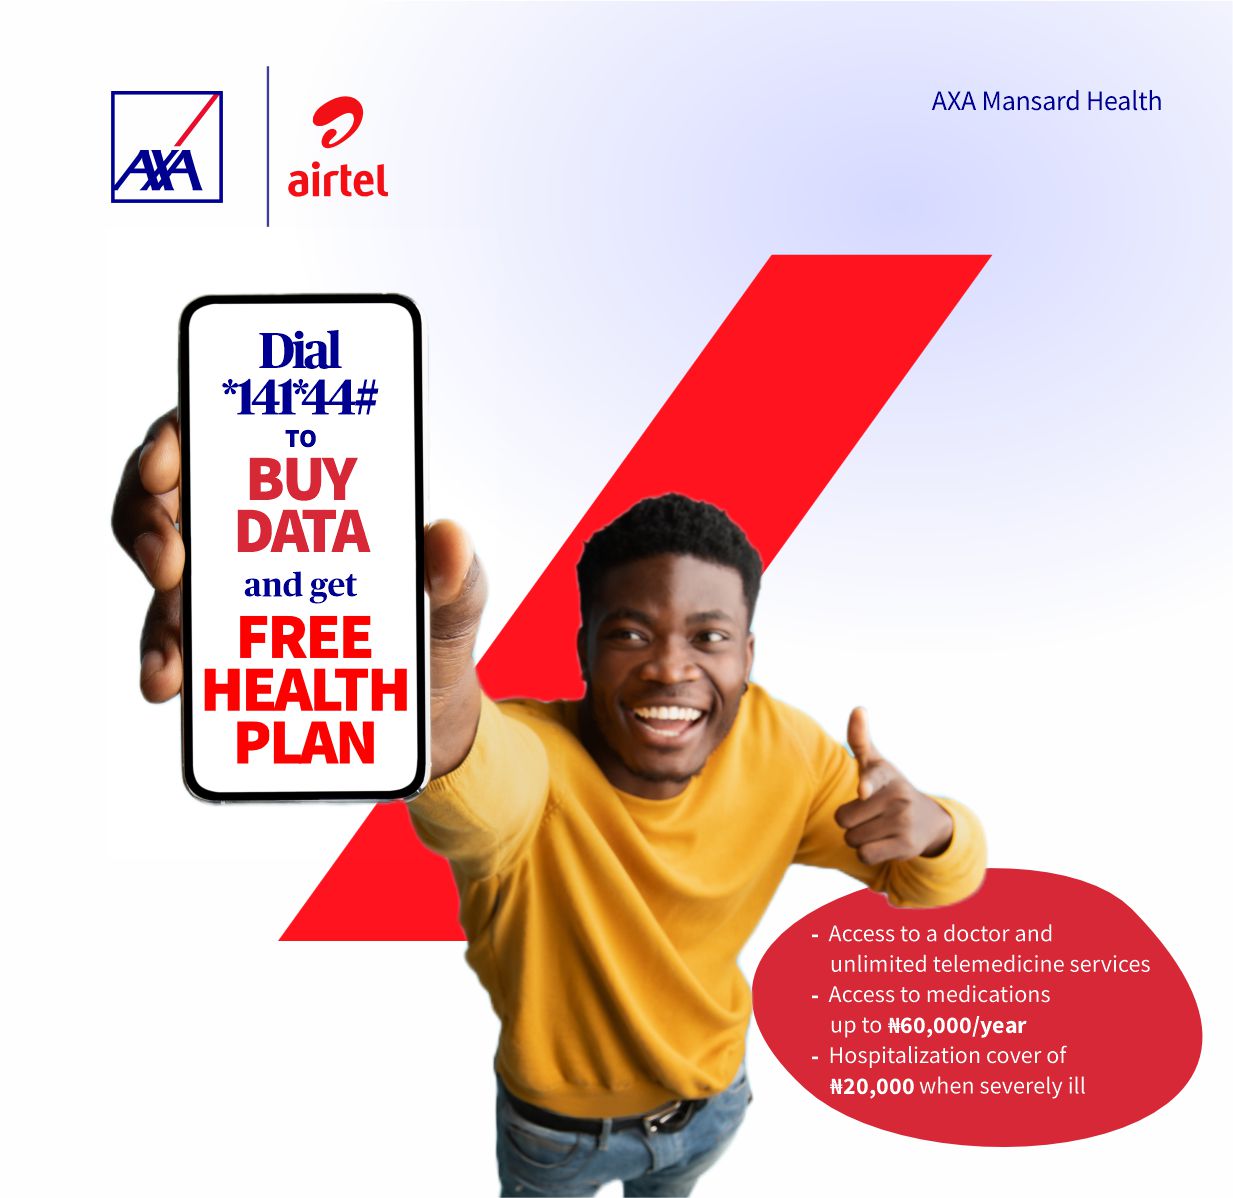 All you should know about the embedded AXA Mansard Health Insurance in Airtel Data Plan